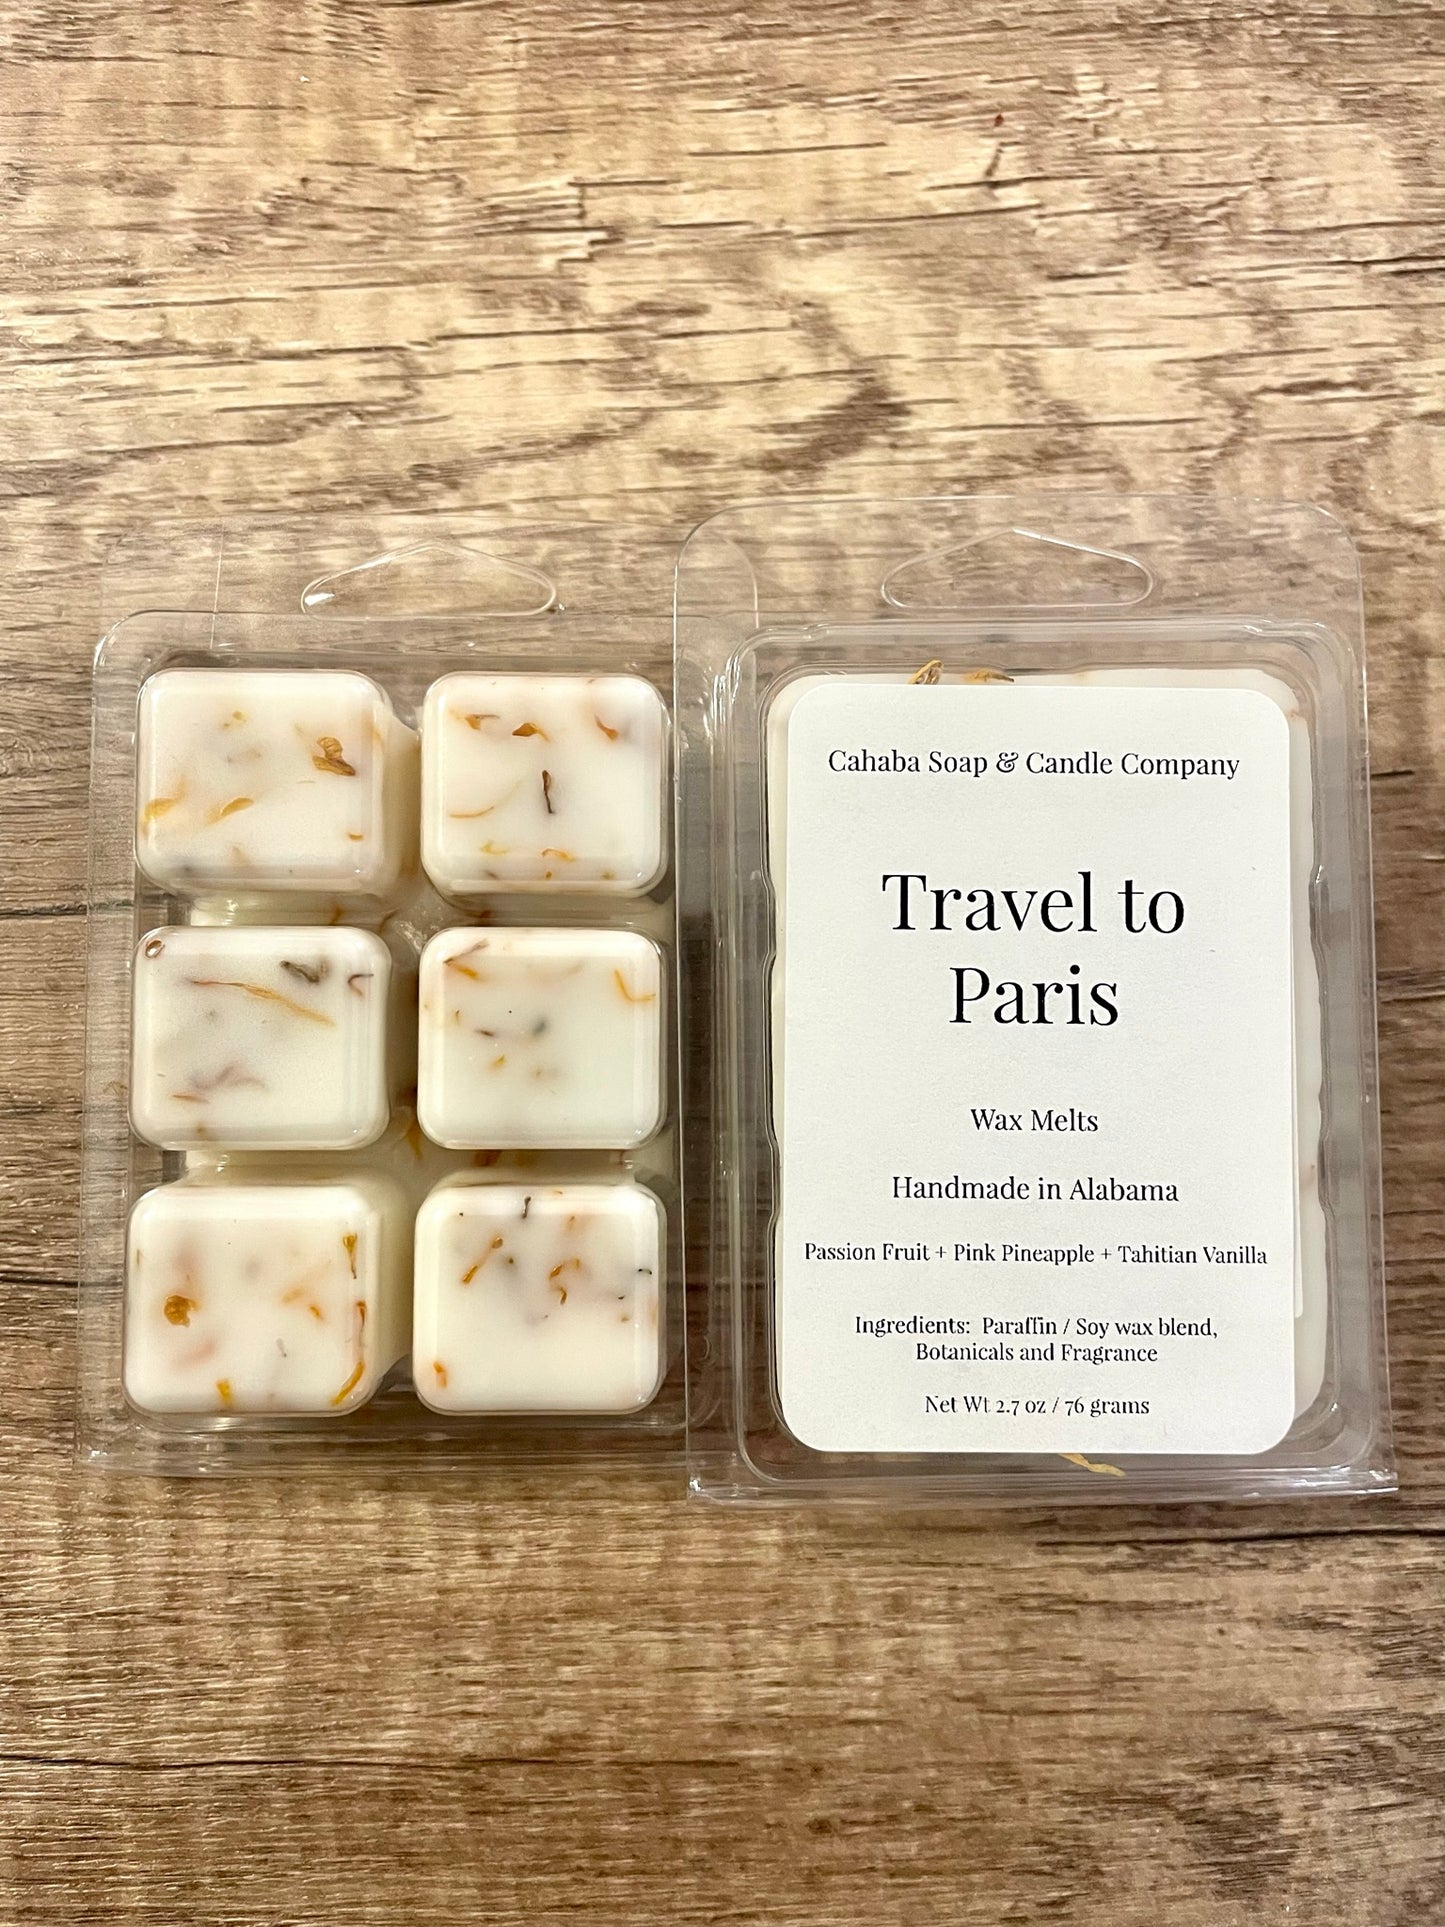 Travel To Paris - Cahaba Soap and Candle Company